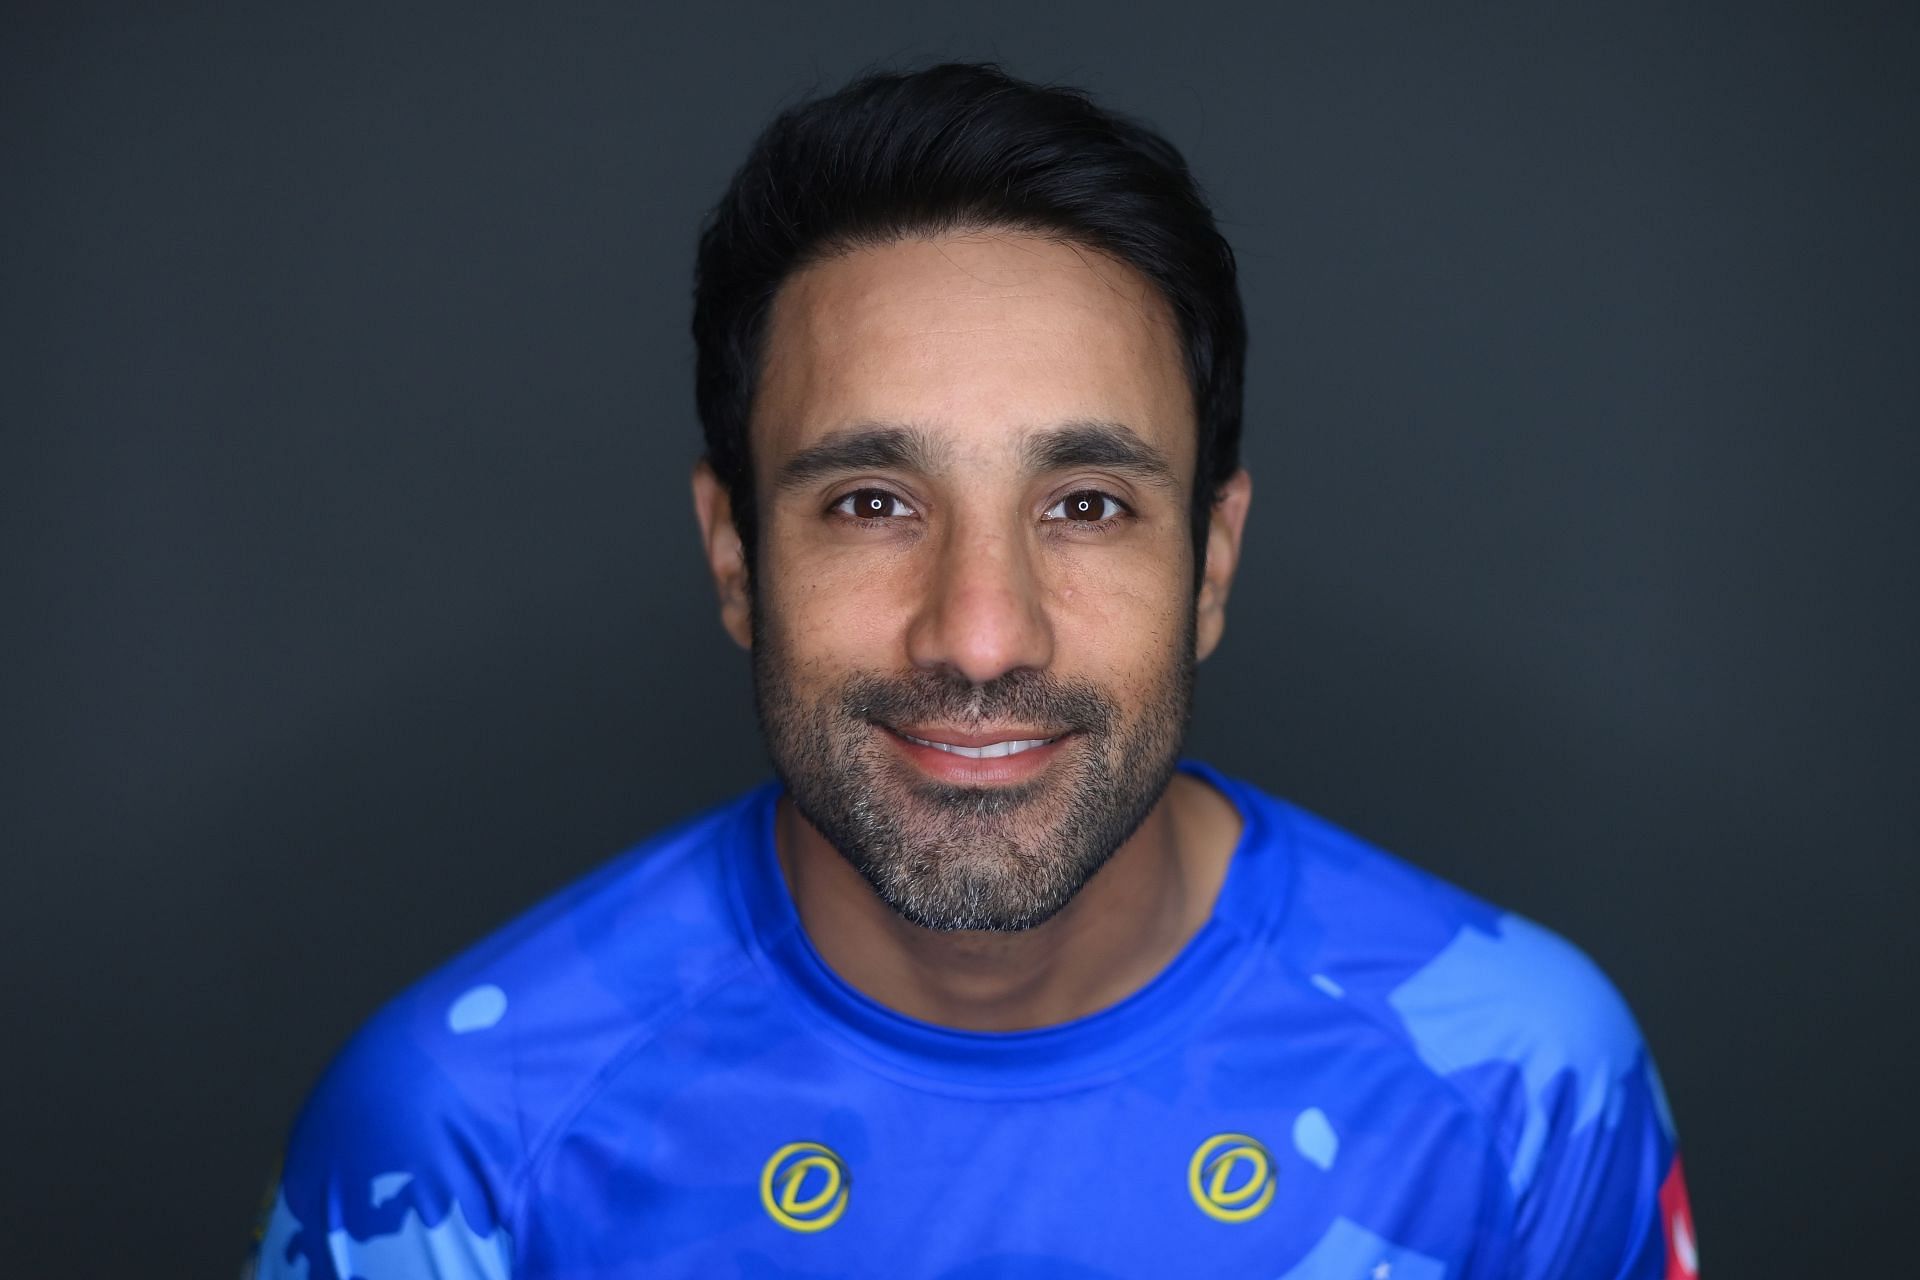 Ravi Bopara, one of the most talented England players